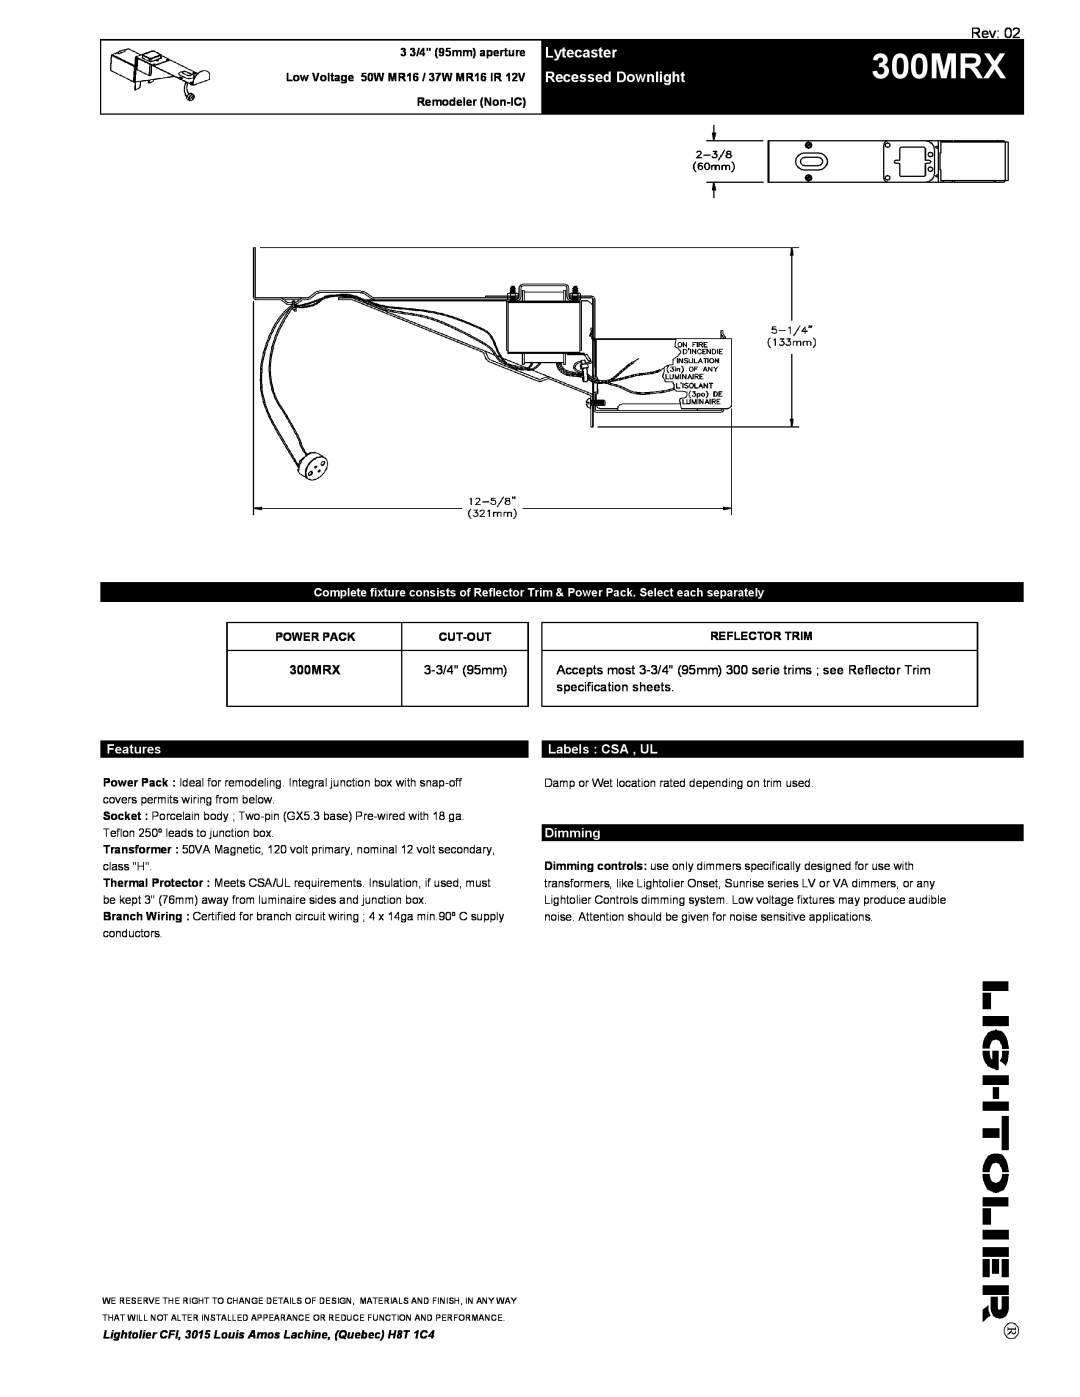 Lightolier 300MRX specifications Rev, Lytecaster, Recessed Downlight, Features, Labels CSA , UL, Dimming, Remodeler Non-IC 